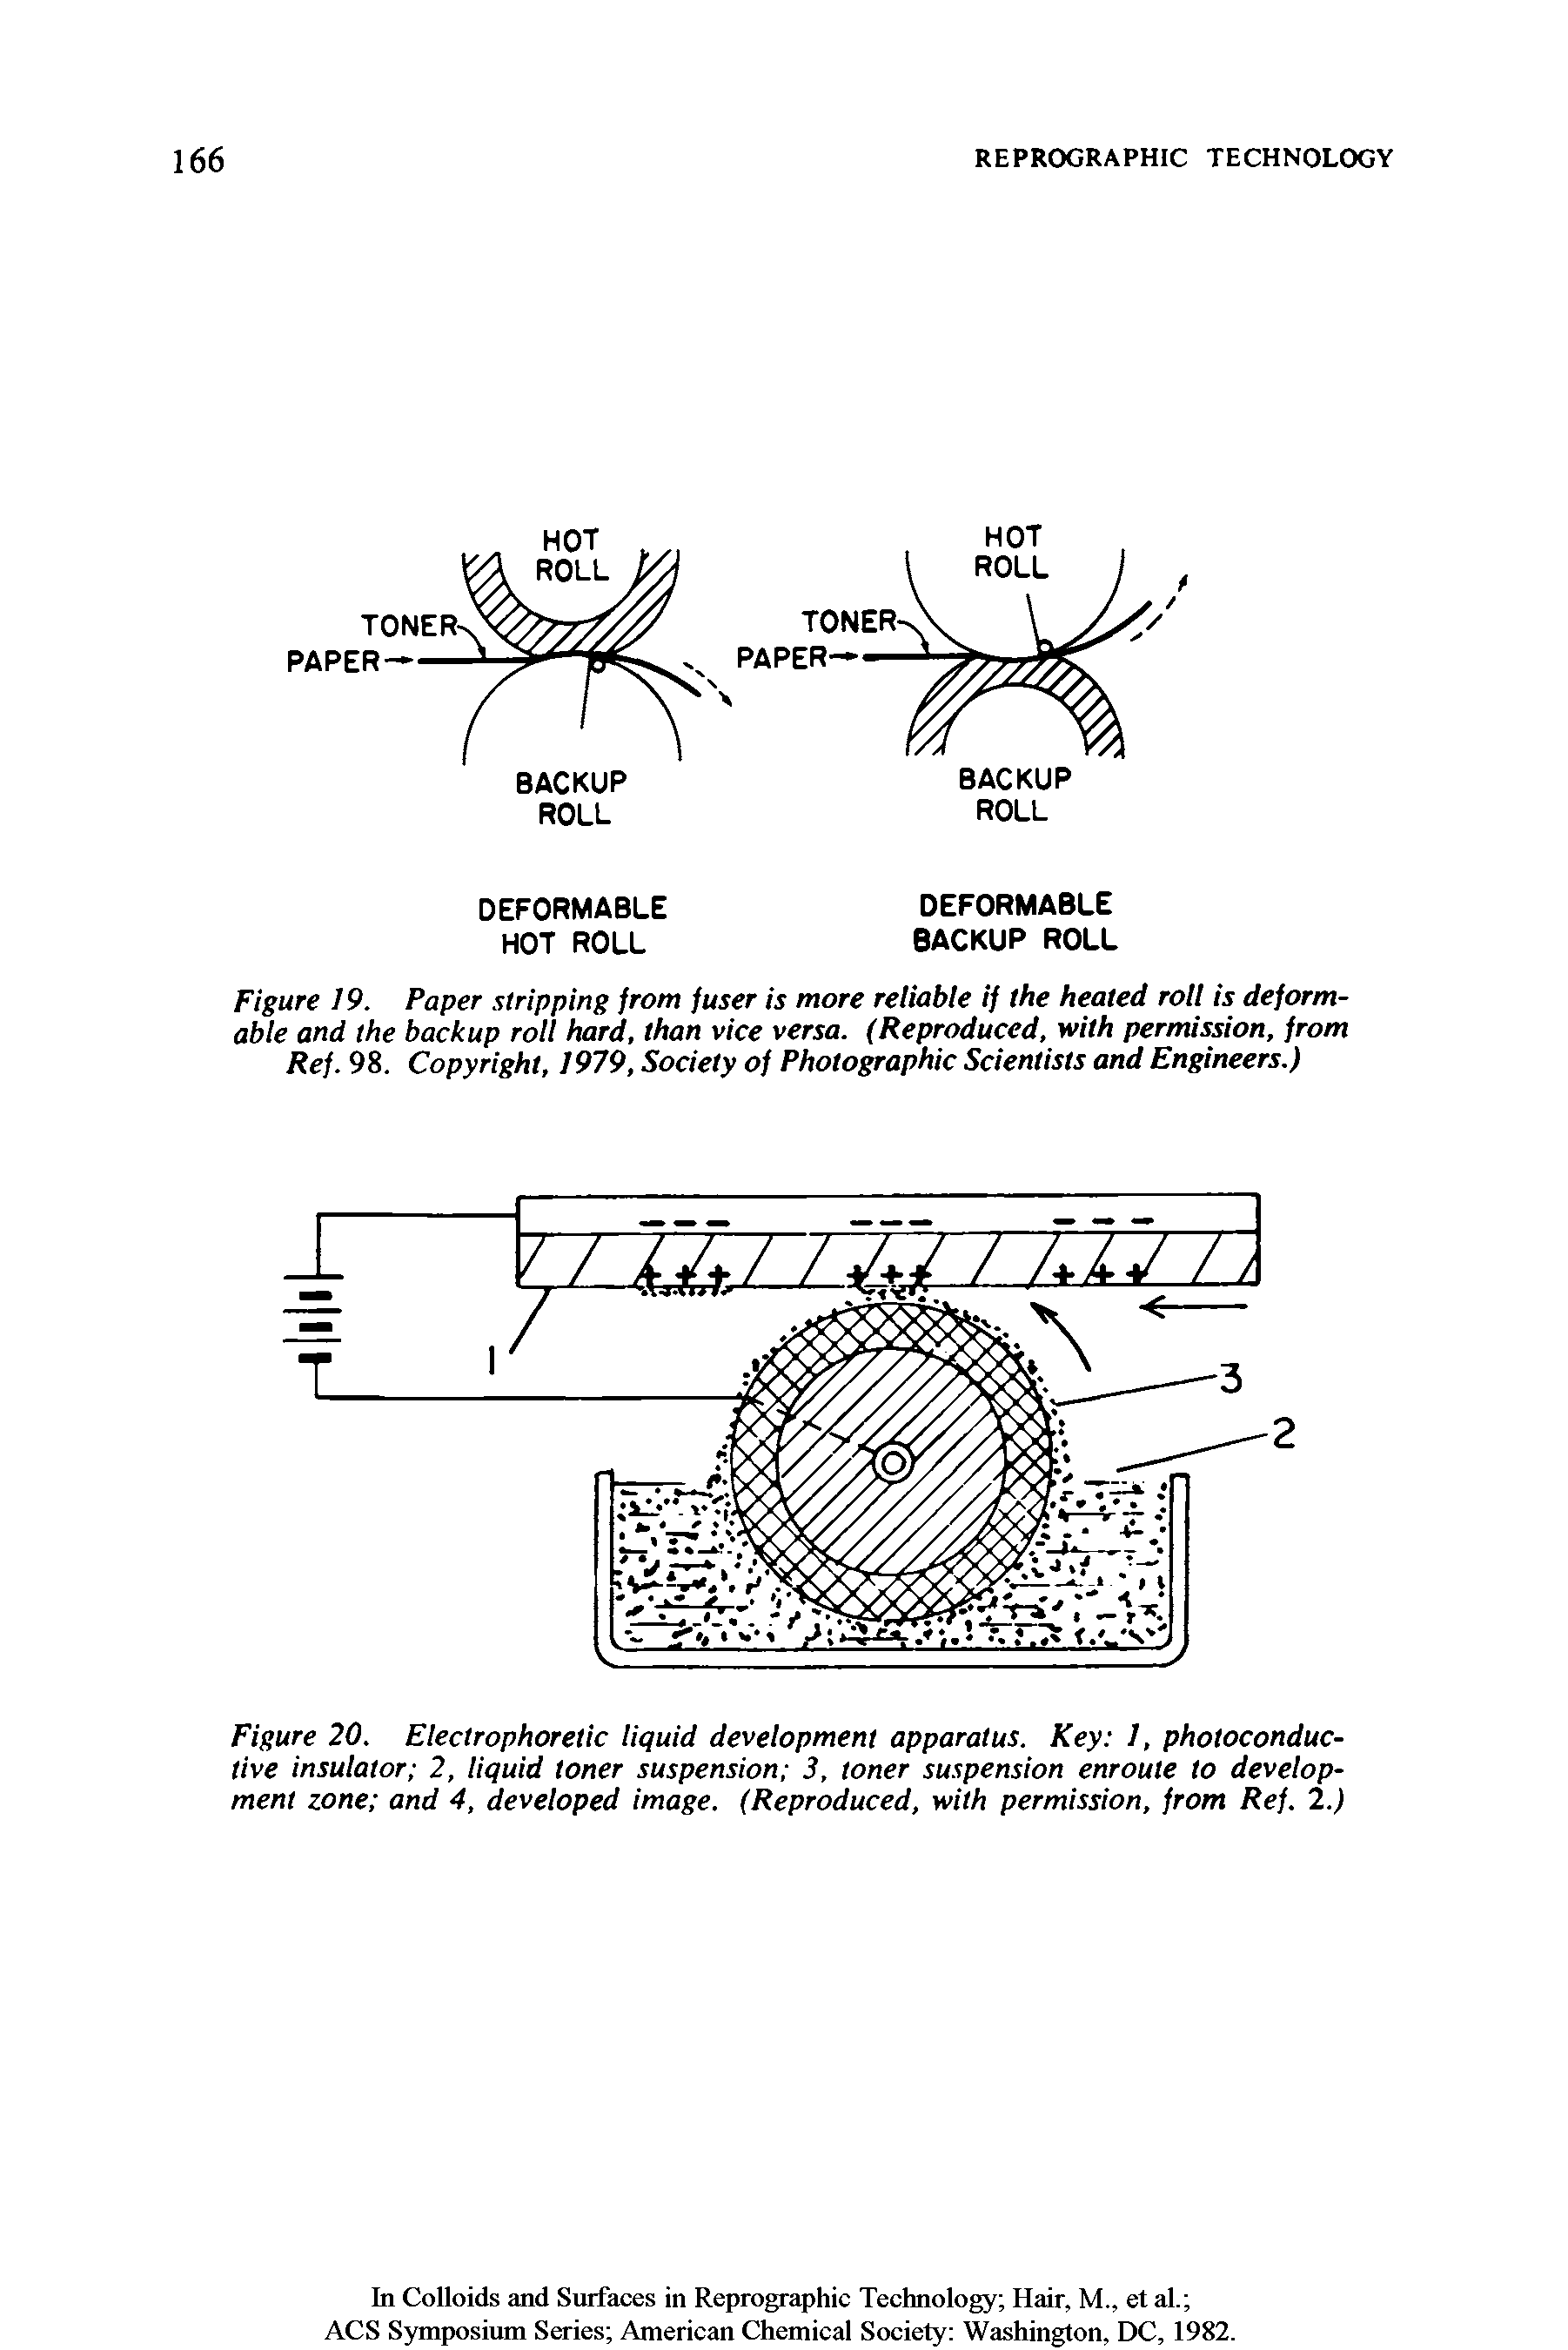 Figure 19. Paper stripping from fuser is more reliable if the heated roll is deformable and the backup roll hard, than vice versa. (Reproduced, with permission, from Ref. 98. Copyright, 1979, Society of Photographic Scientists and Engineers.)...